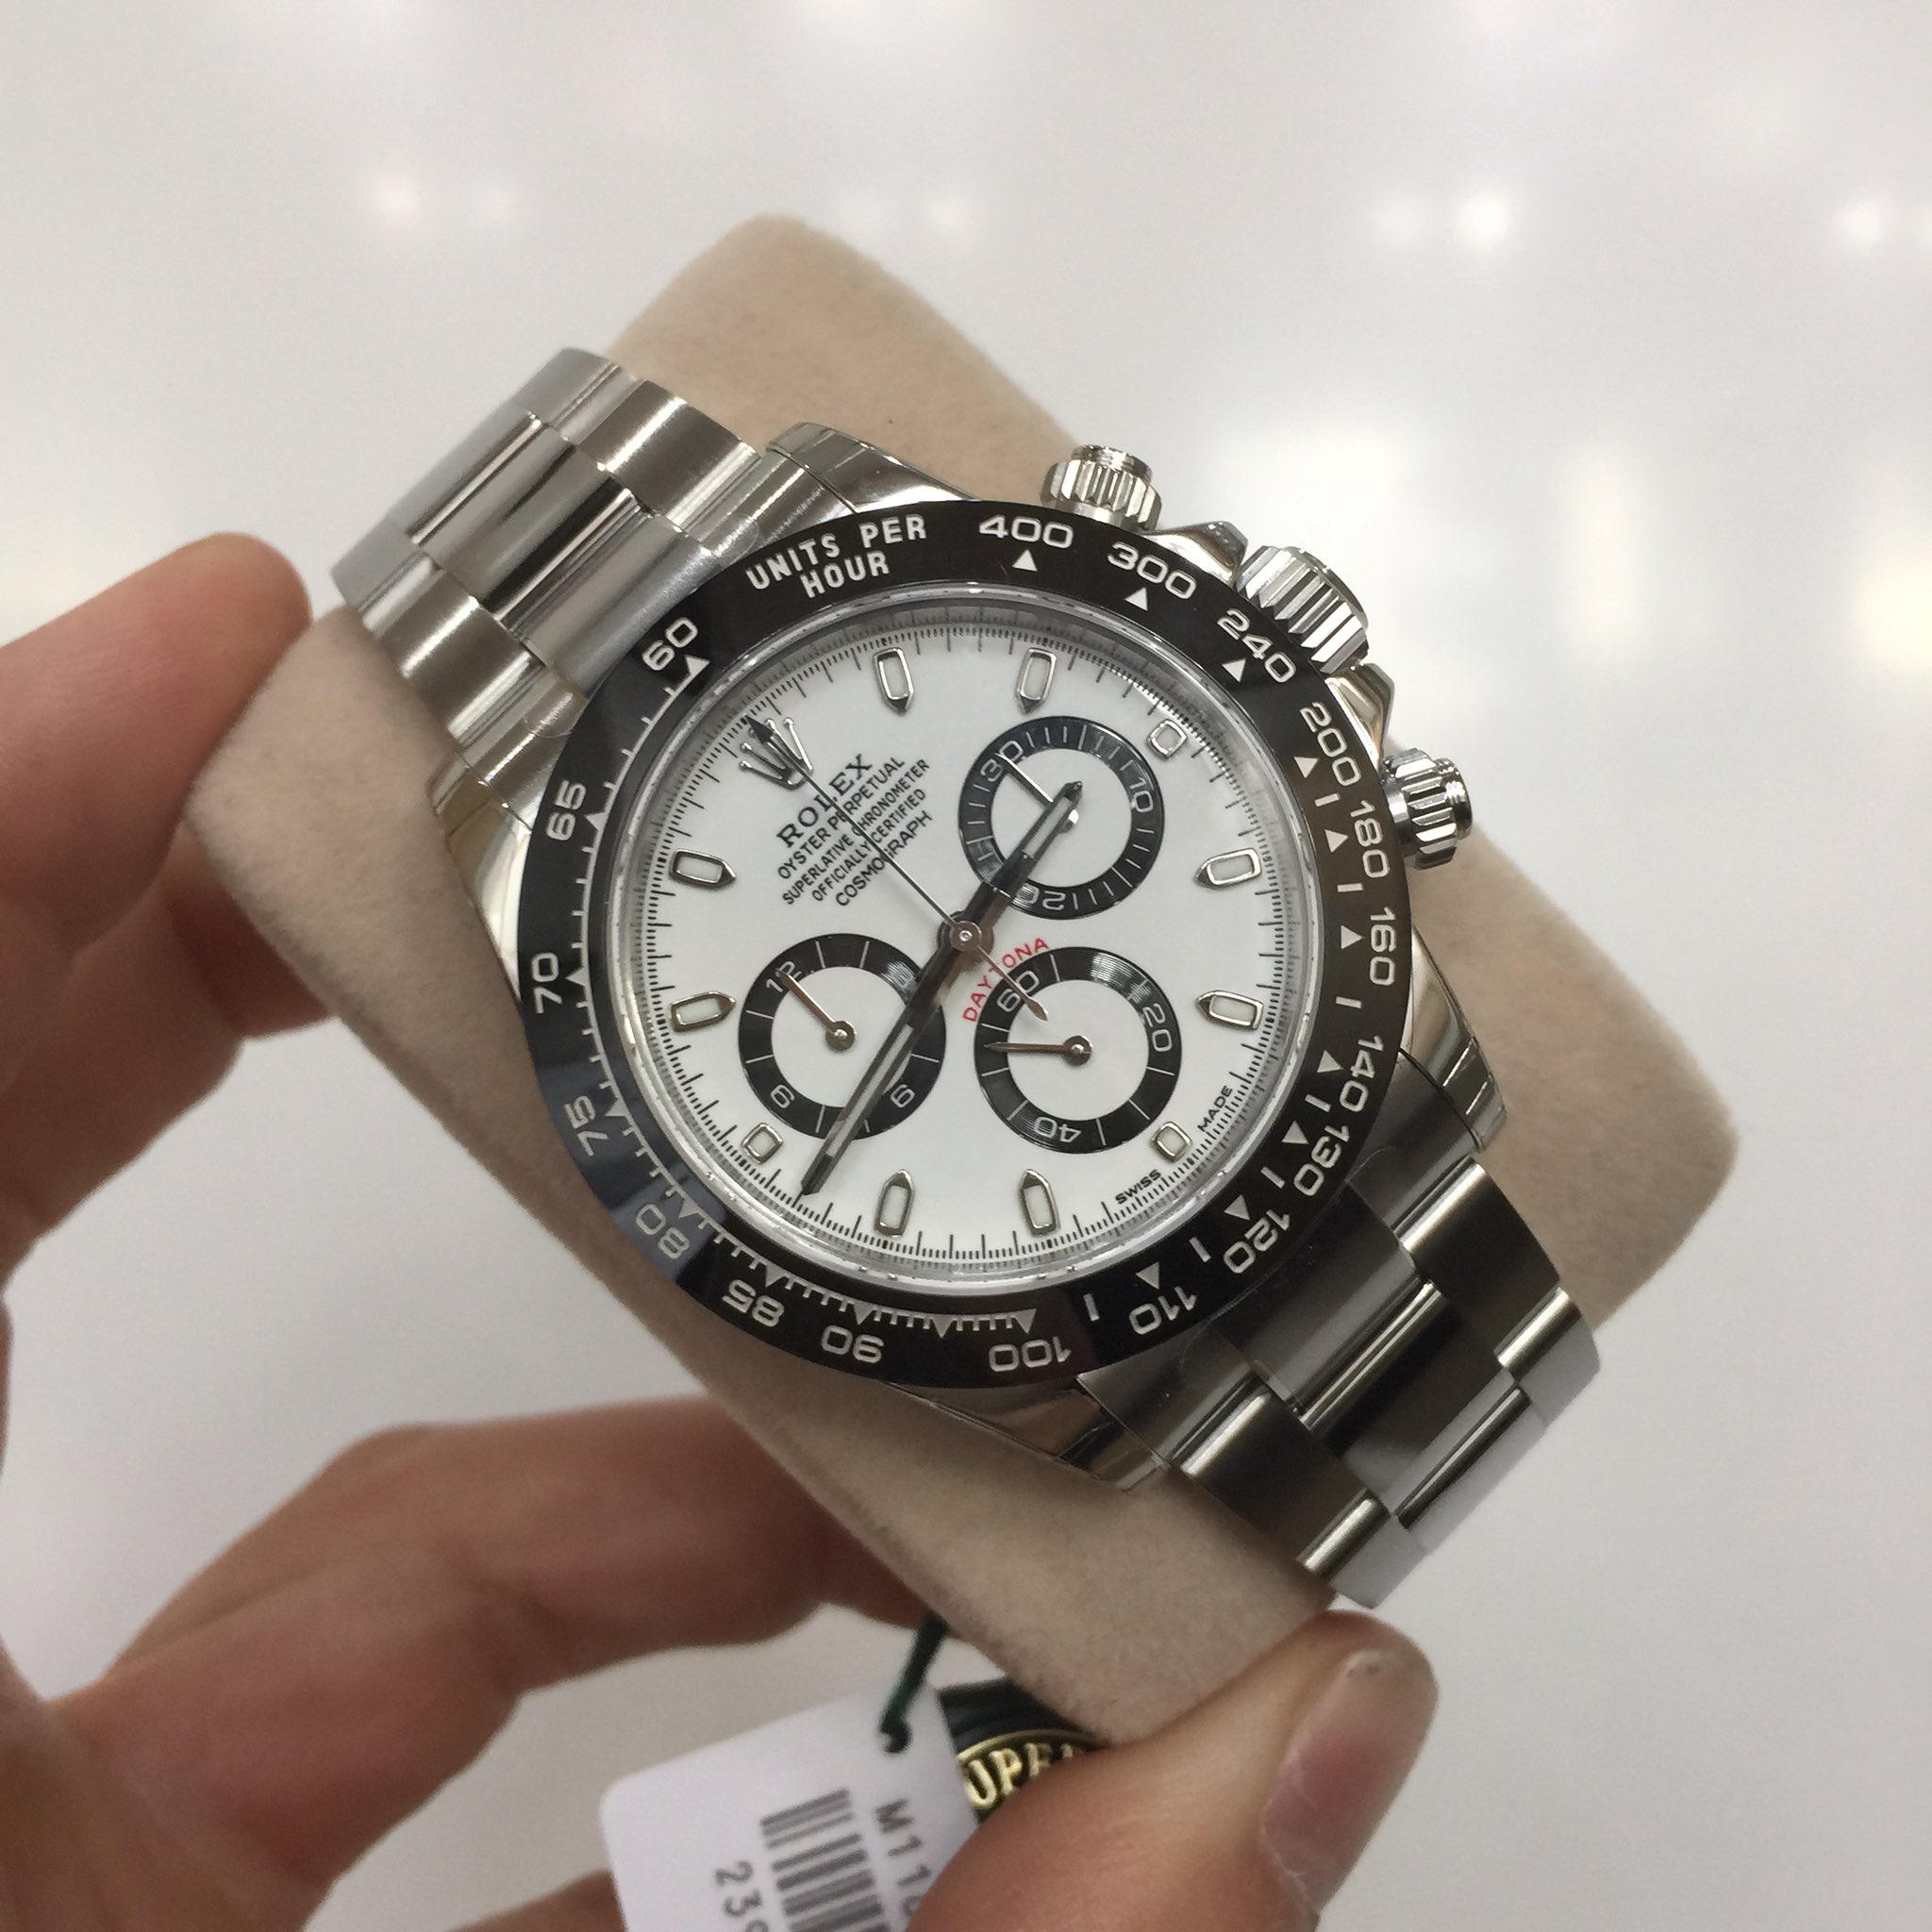 Why Go For Pre-Owned Watches?